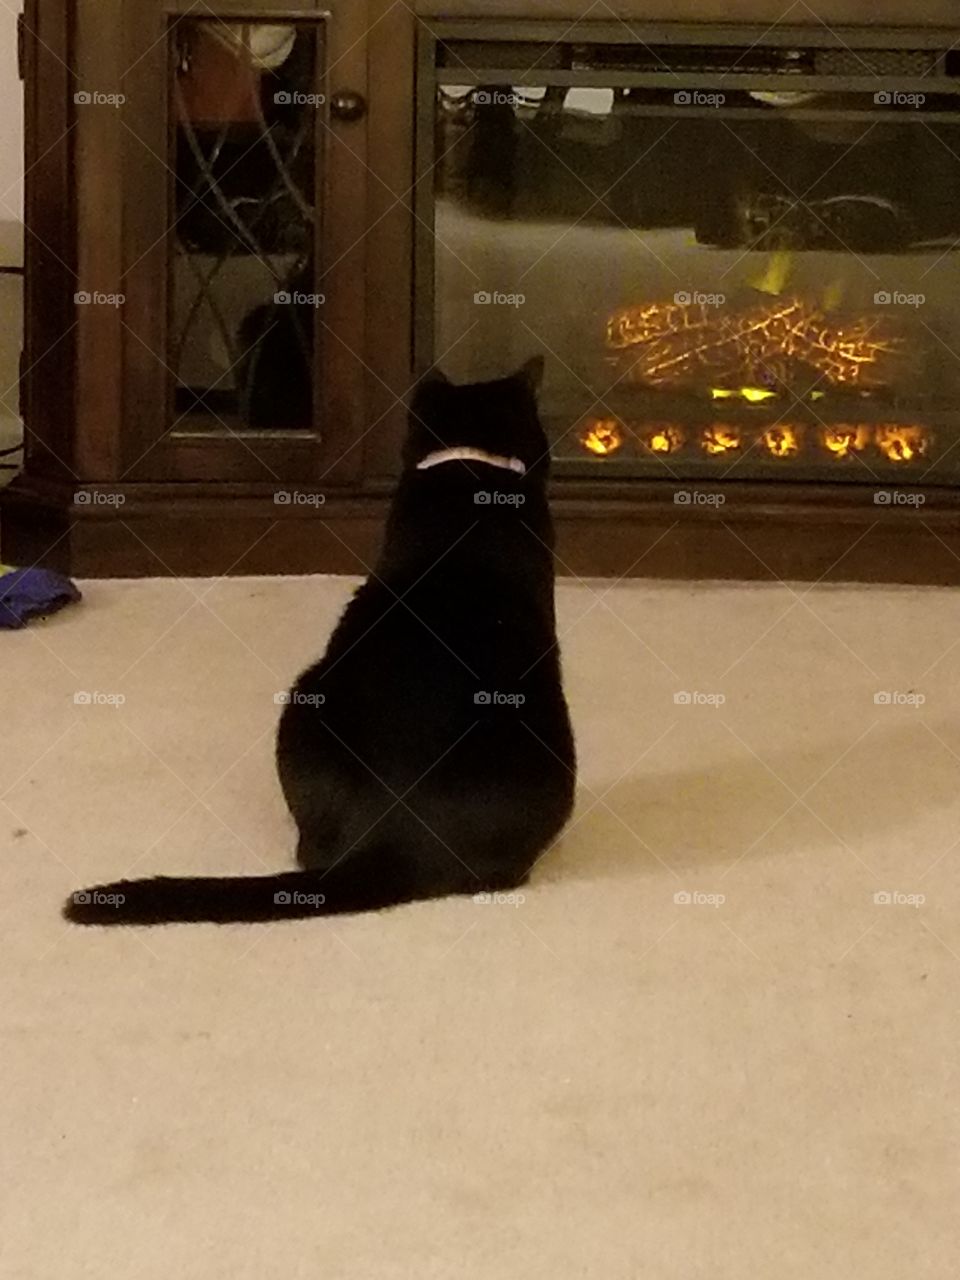 Daisy, our black cat, enjoying the electric fireplace entertainment center from Lowes, on a cold winter day.